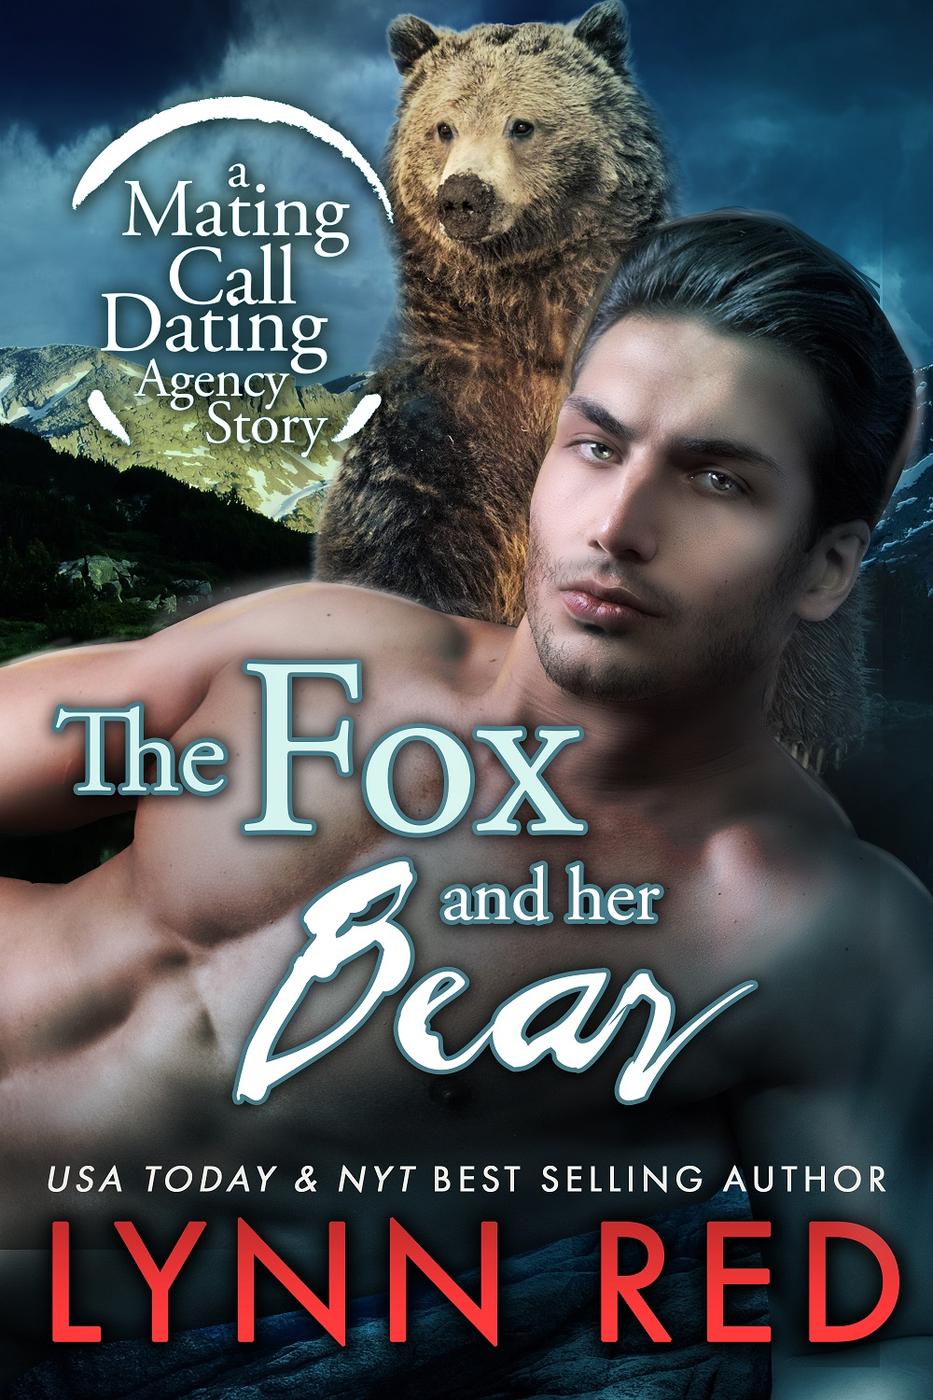 The Fox and her Bear (Mating Call Dating Agency, #2) by Lynn Red